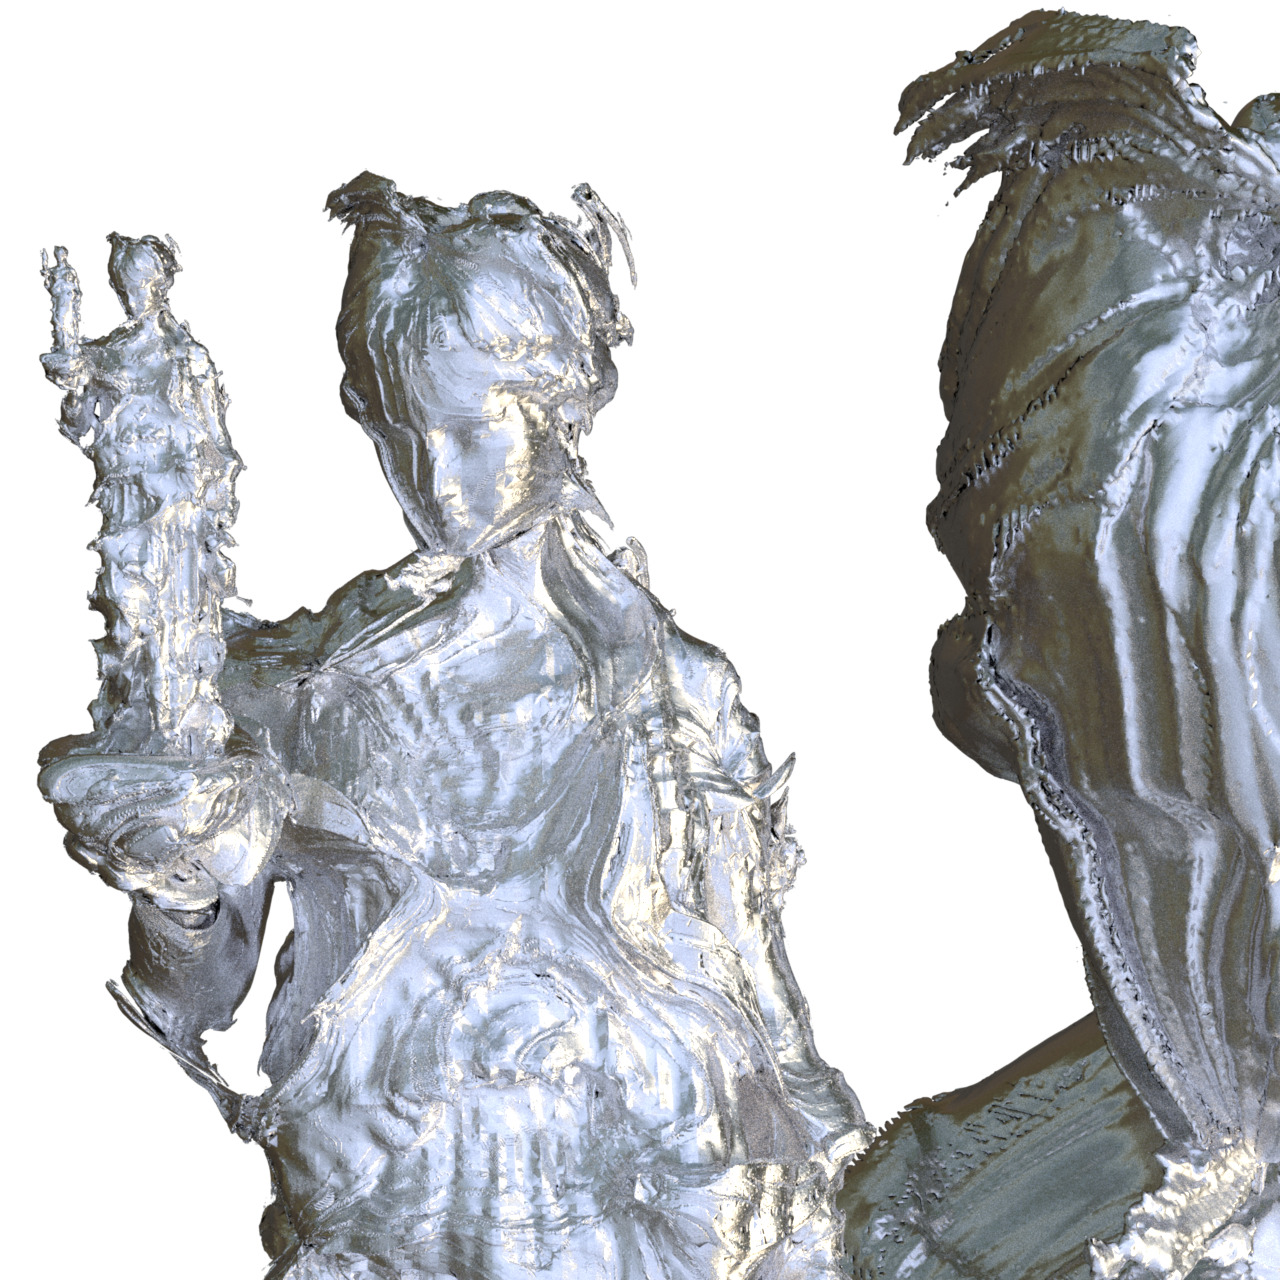 A fractal statue of Hebe, recursing infinitely atop a bowl in her hand.